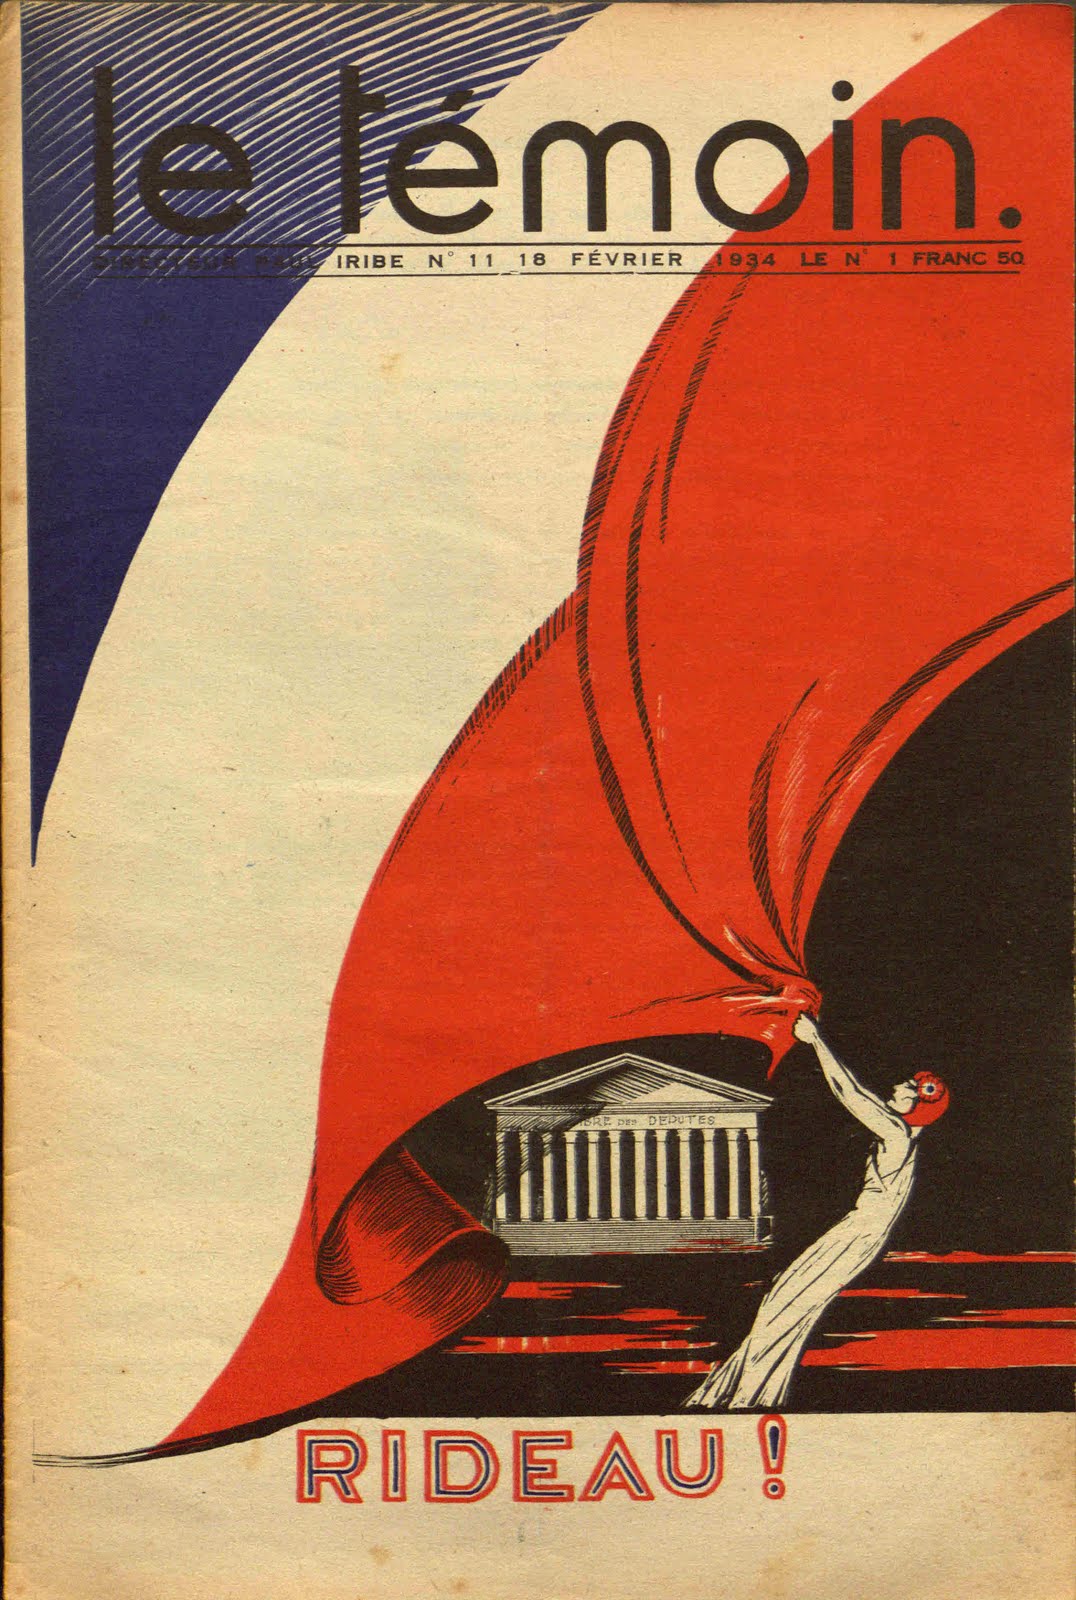 February 1934 cover for Le Temoin, the French political satire journal by Paul Iribe, with the phrase "Rideau!" underneath an illustration of a woman tugging on the French flag)